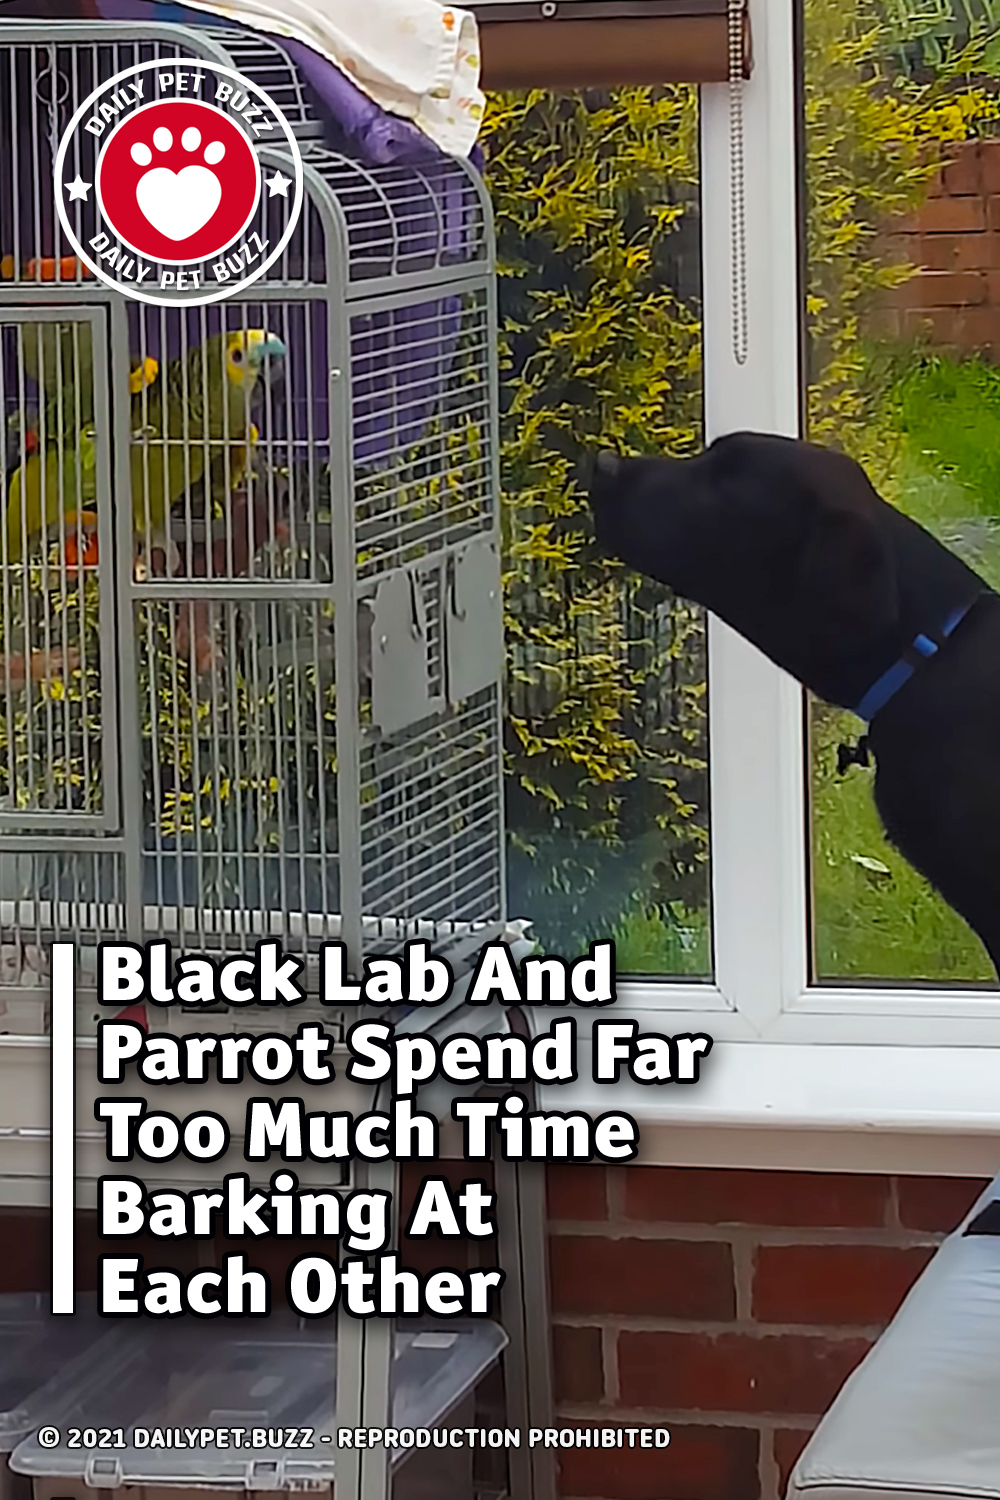 Black Lab And Parrot Spend Far Too Much Time Barking At Each Other